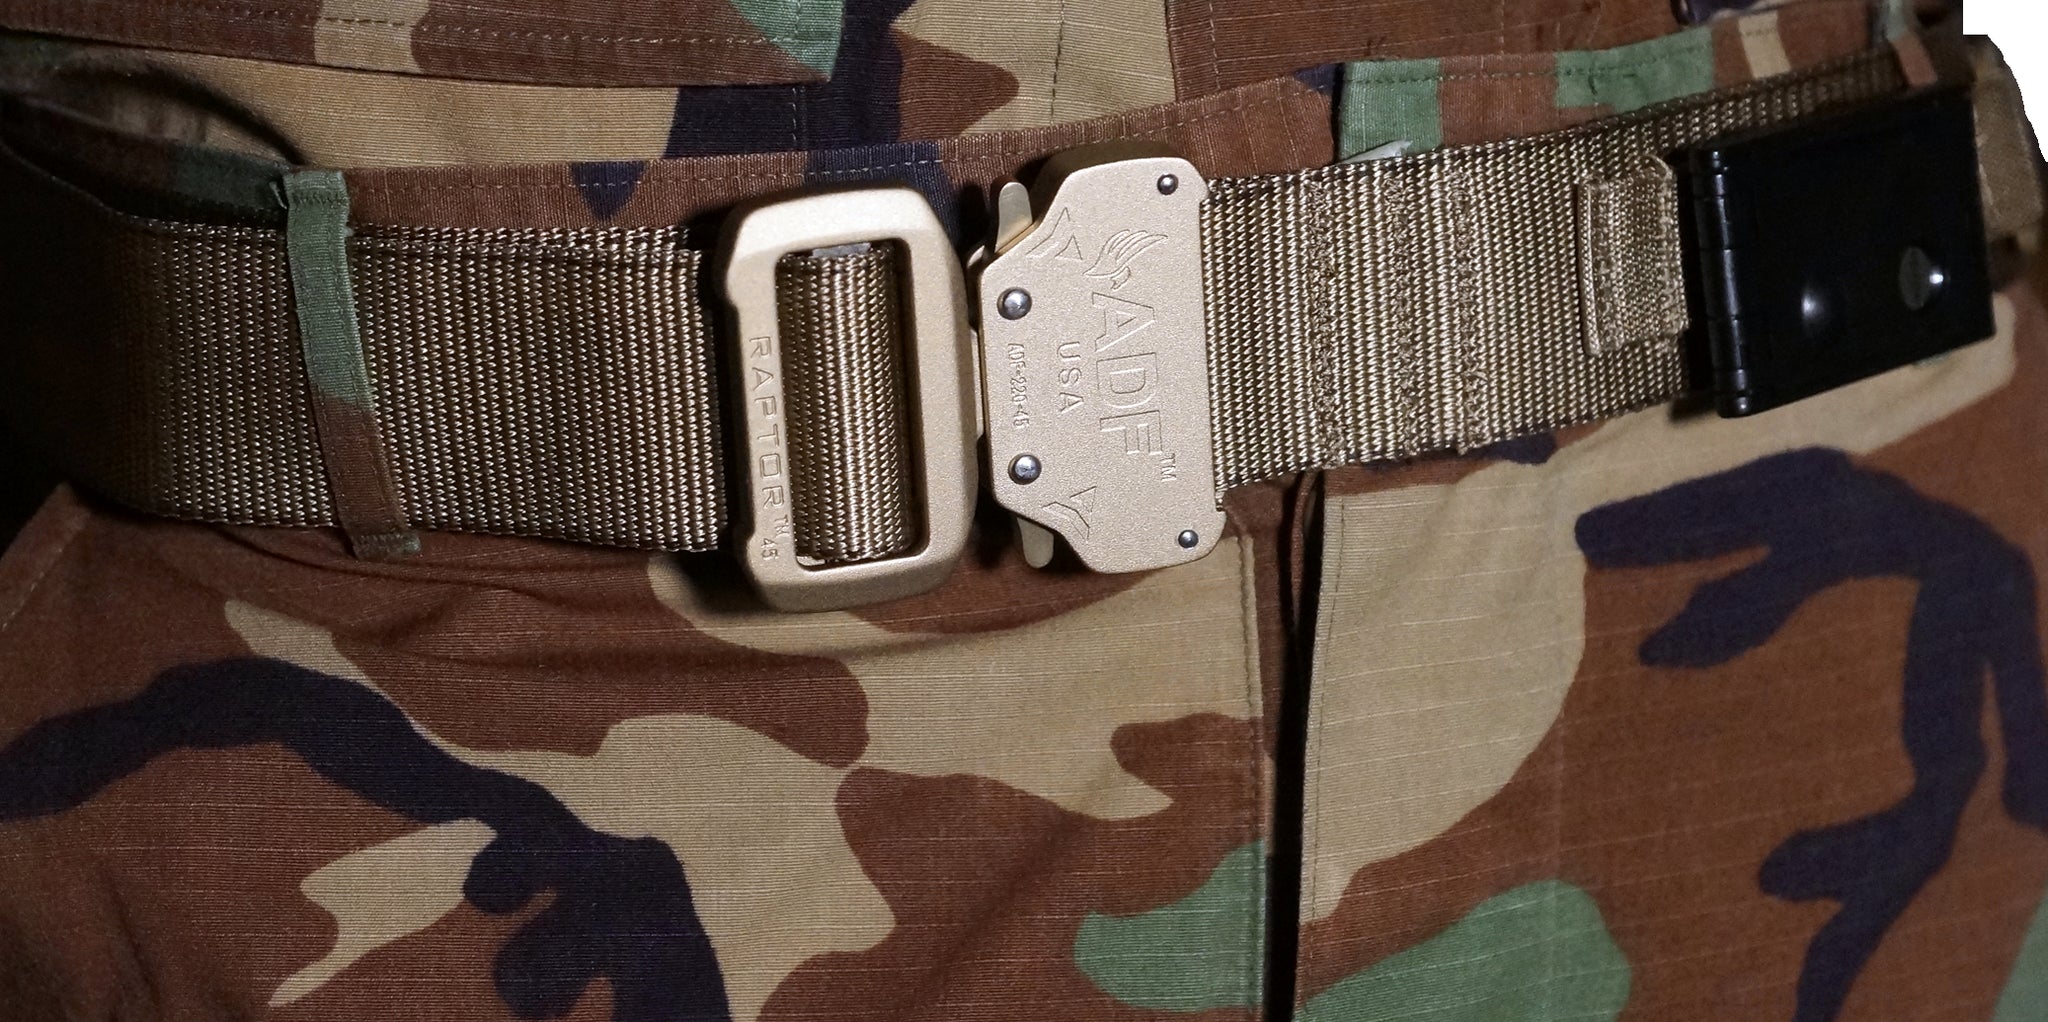 Tan/Coyote DBF Belt: Zoomed-in view of belt showing the TLD securely fitted to belt.